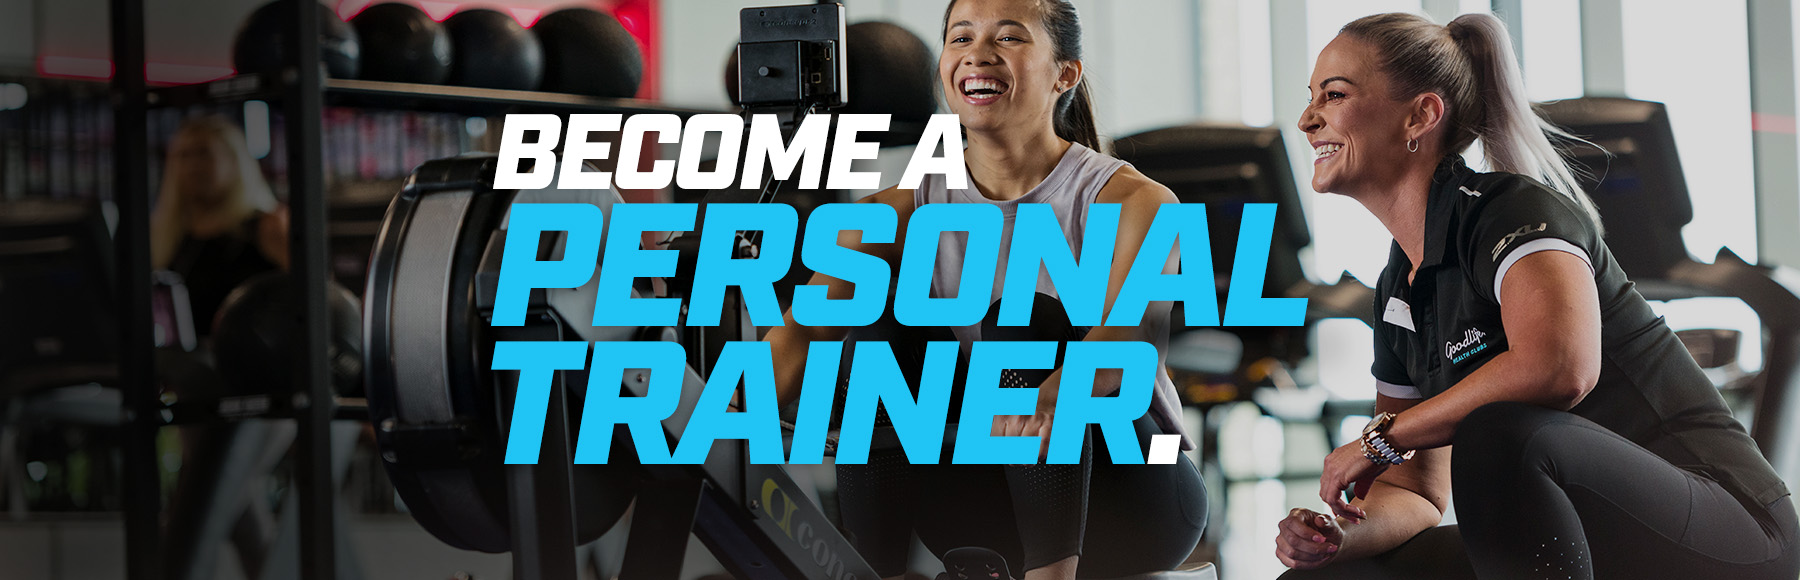 Become a Fitness Professional - Goodlife Health Clubs